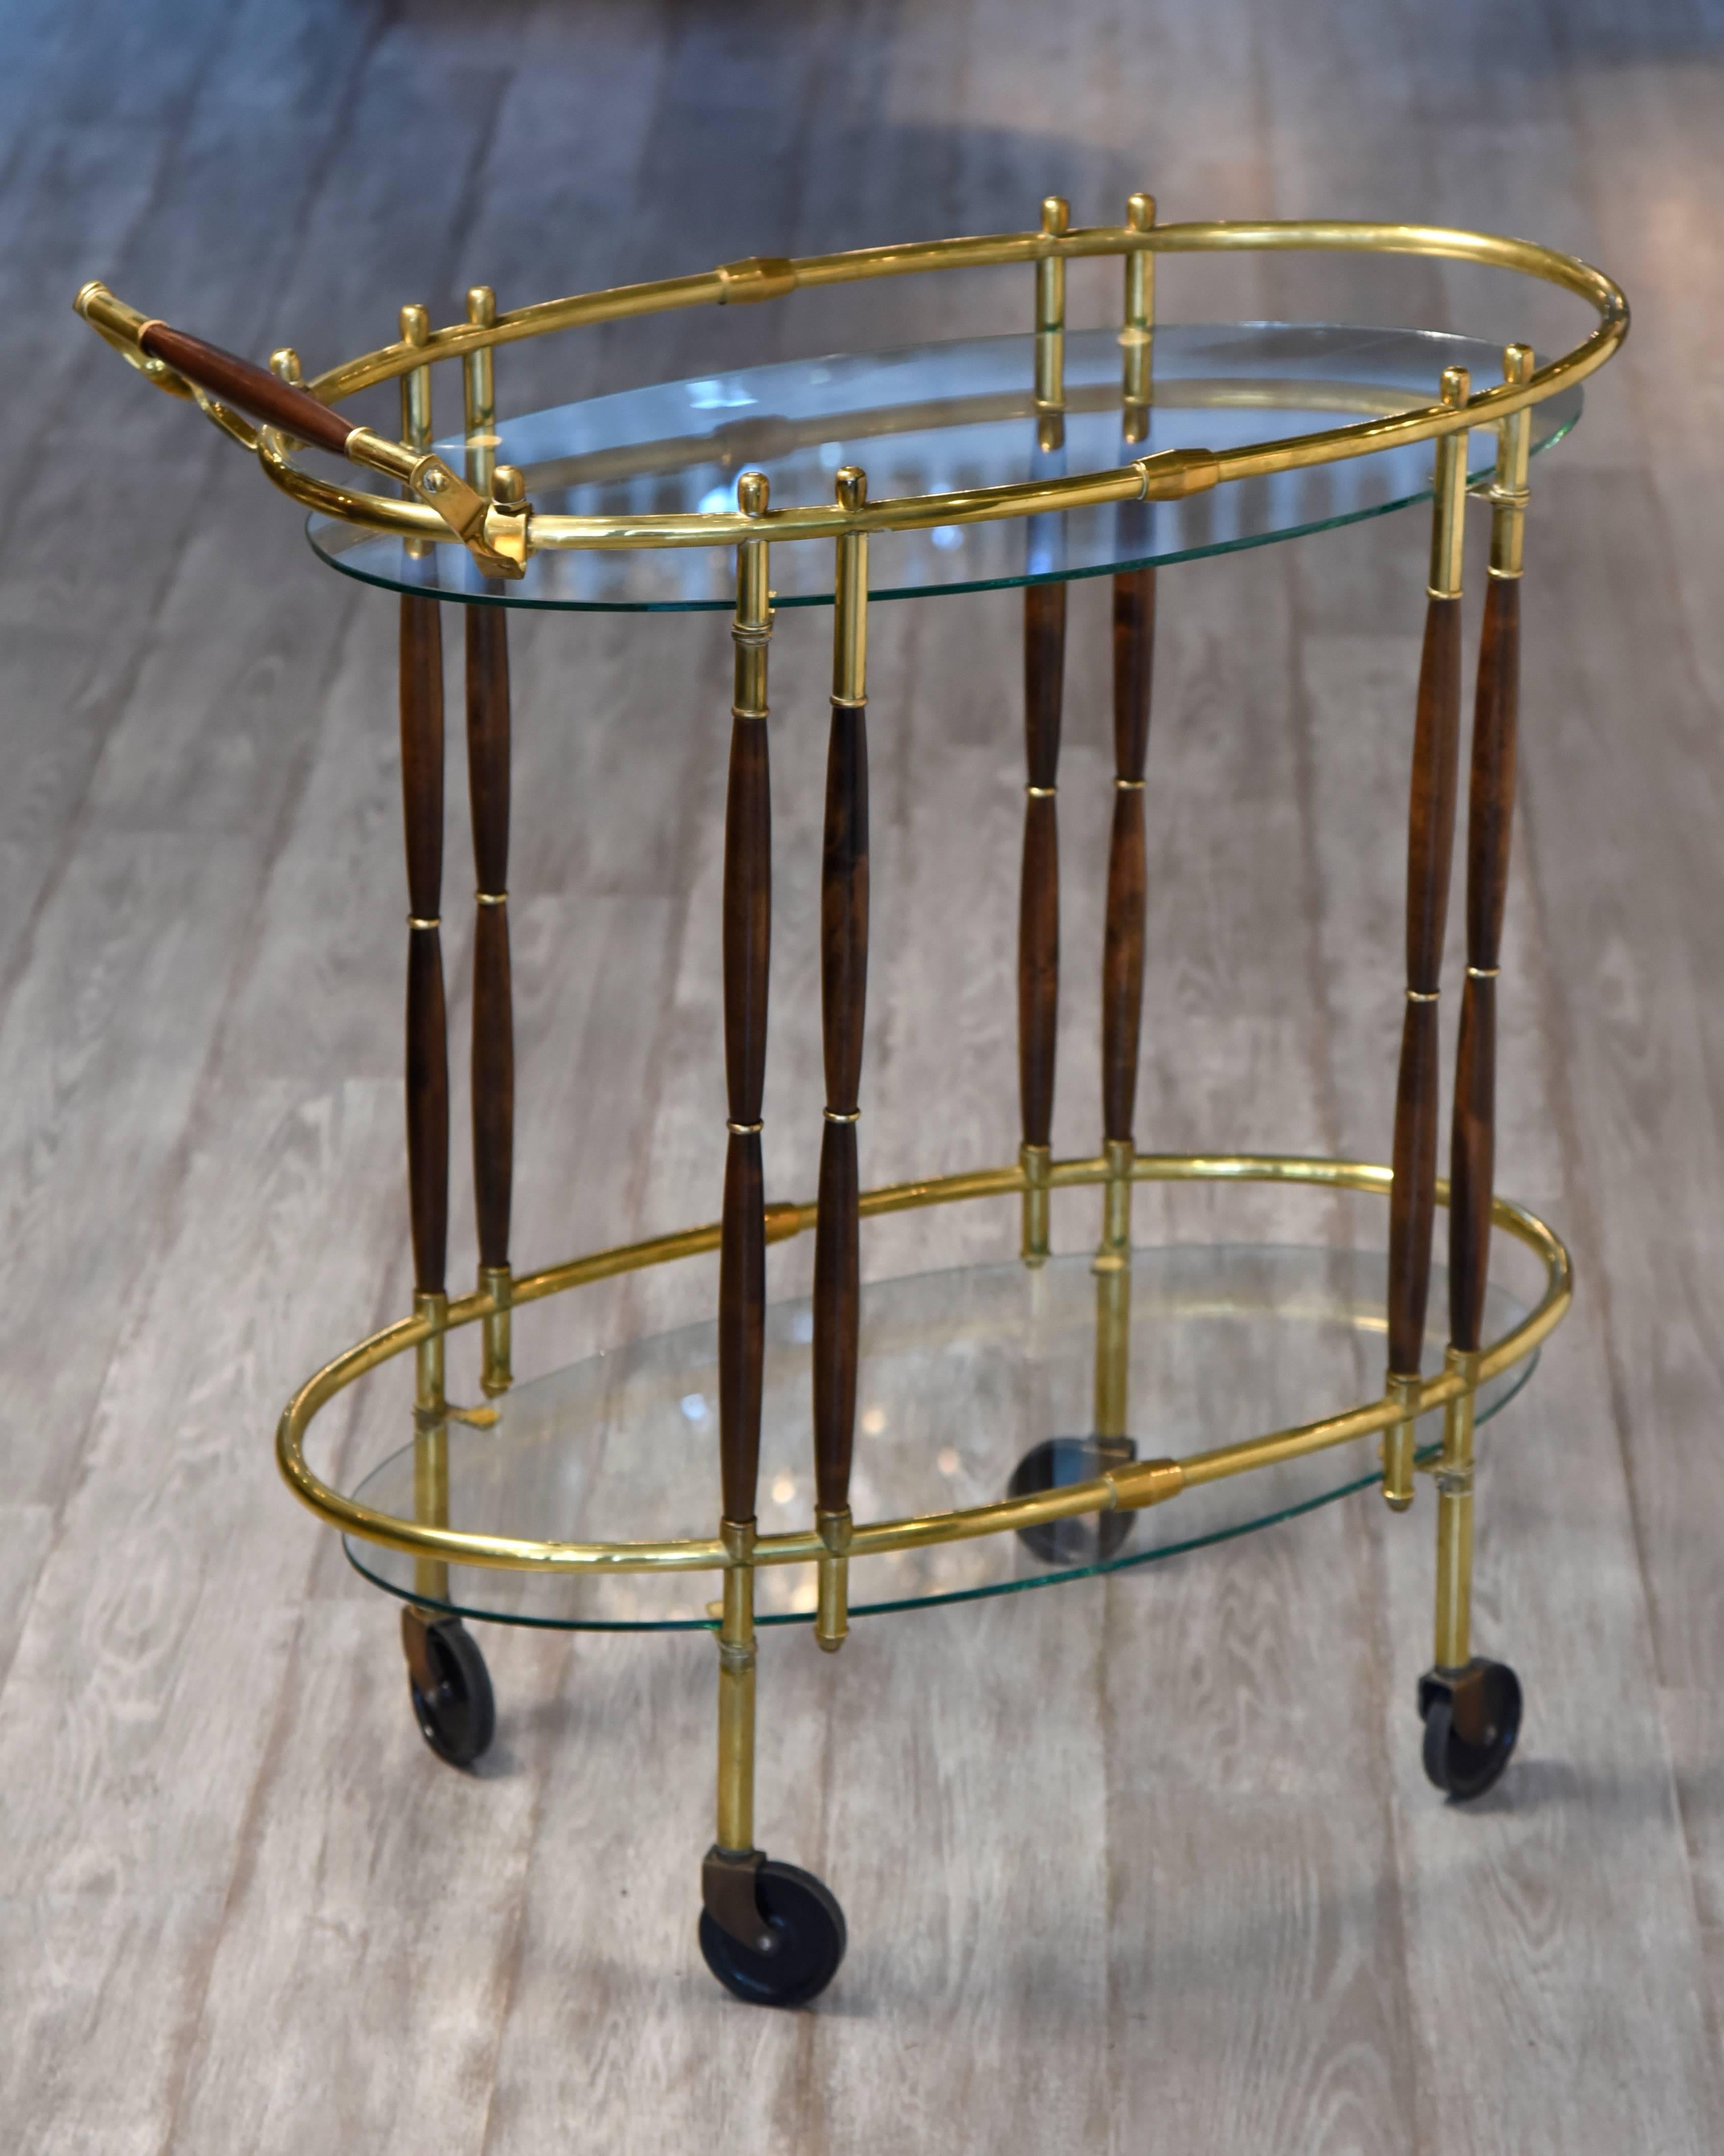 Sophisticated elegant oval bar cart having two glass tiers with brass galleries and sinuous walnut rods that link top to bottom. Measures: 33 inches high to handle. On wheels for easy moving.